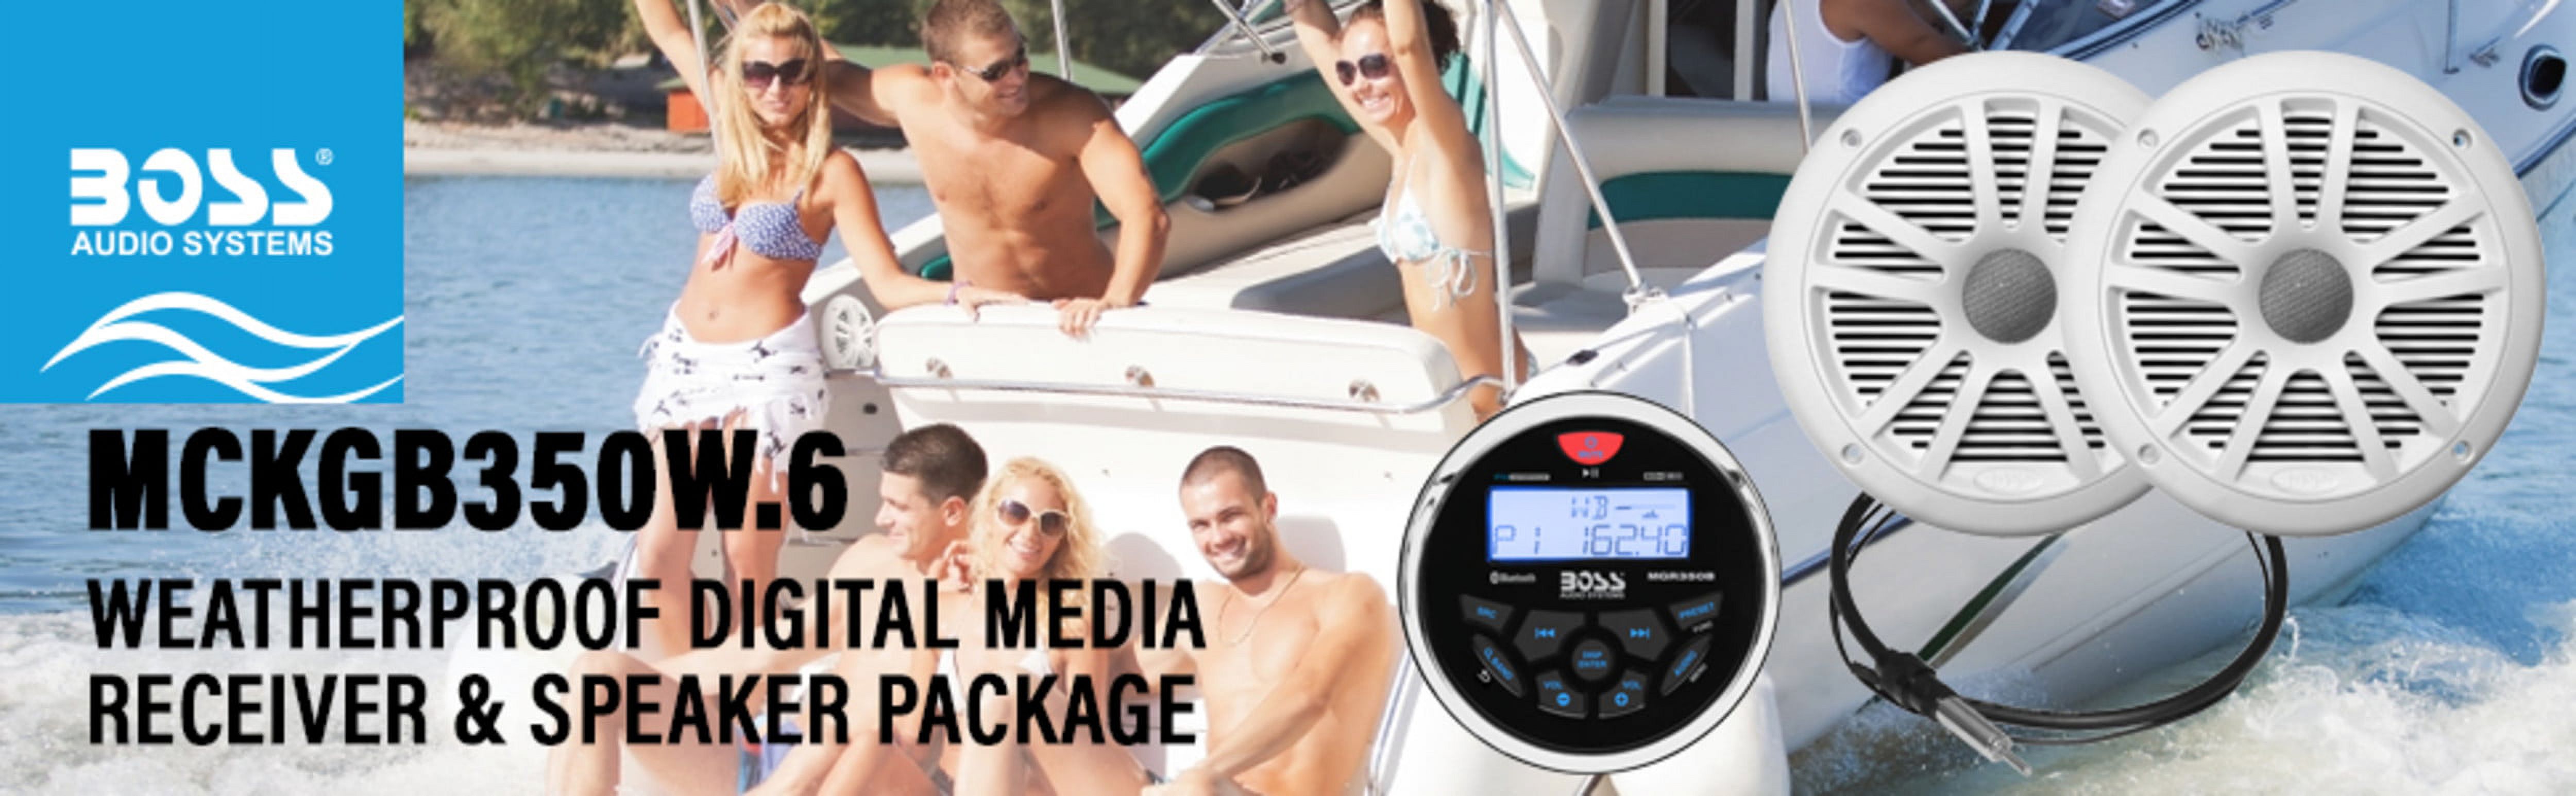 BOSS Audio Systems MCKGB350W.6 Marine Gauge Receiver Speakers, Bluetooth, No CD - image 5 of 17